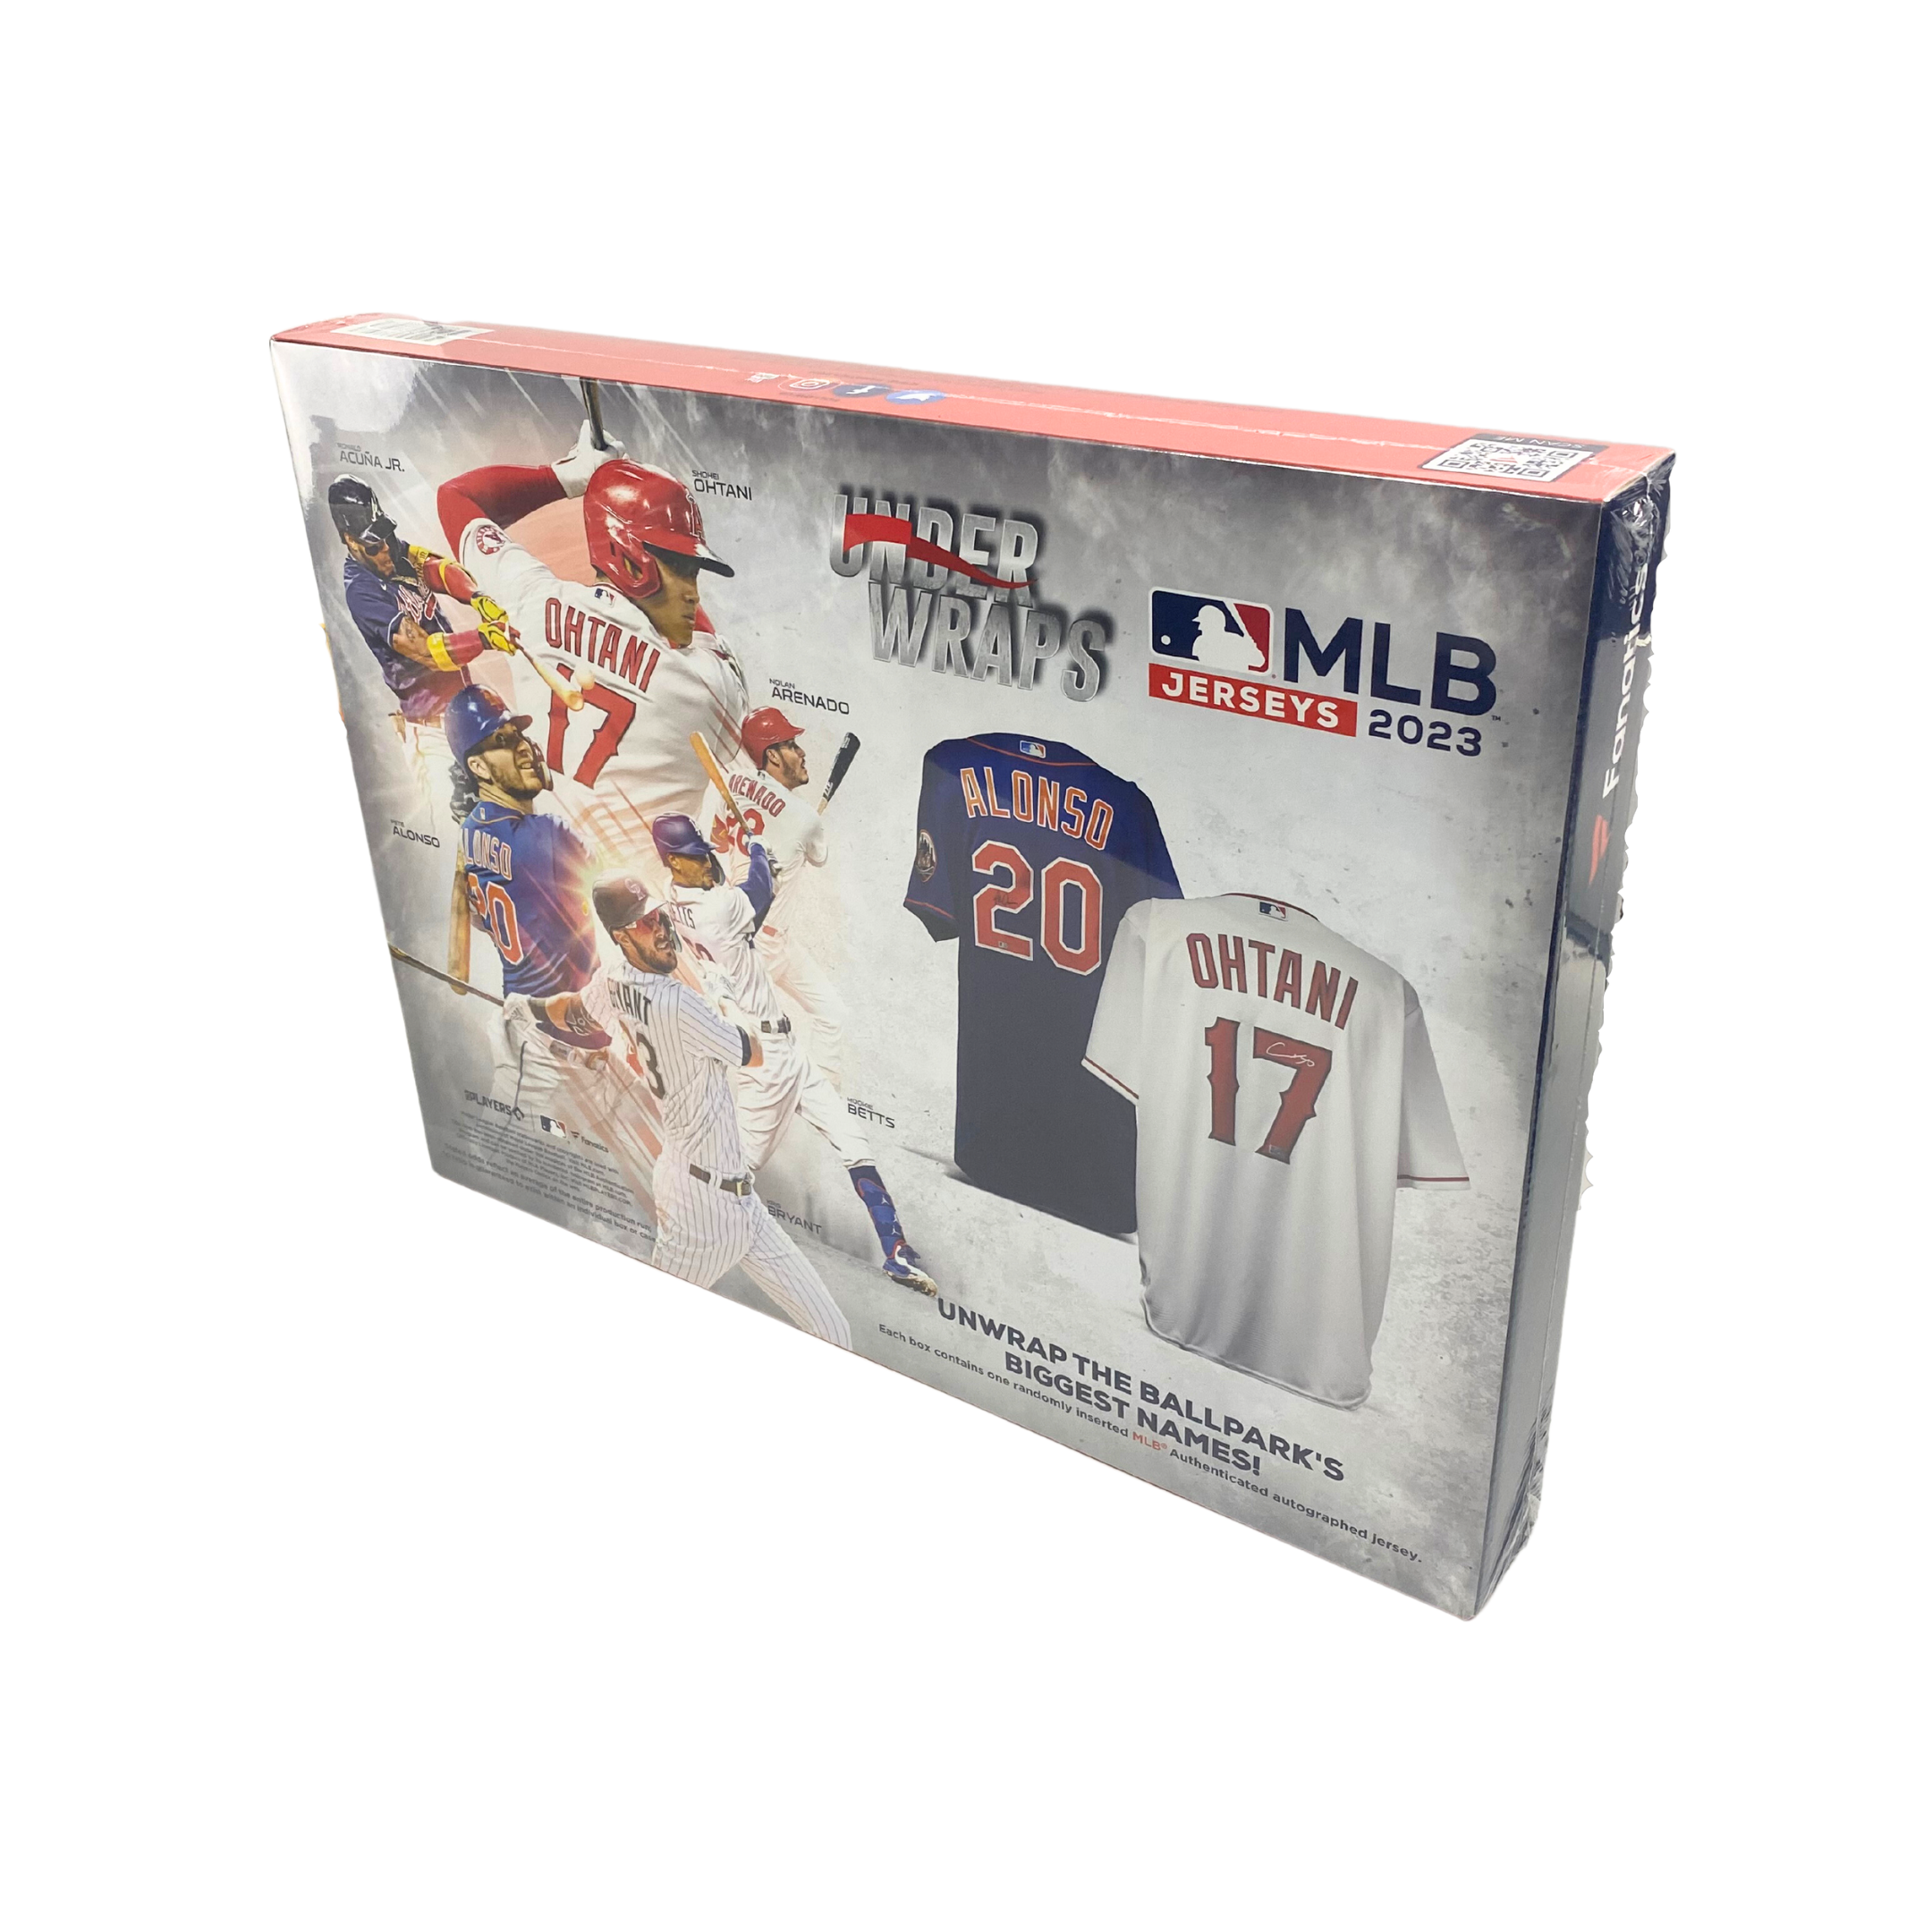 2023 Fanatics Under Wraps Autographed Jersey Box – Piece Of The Game